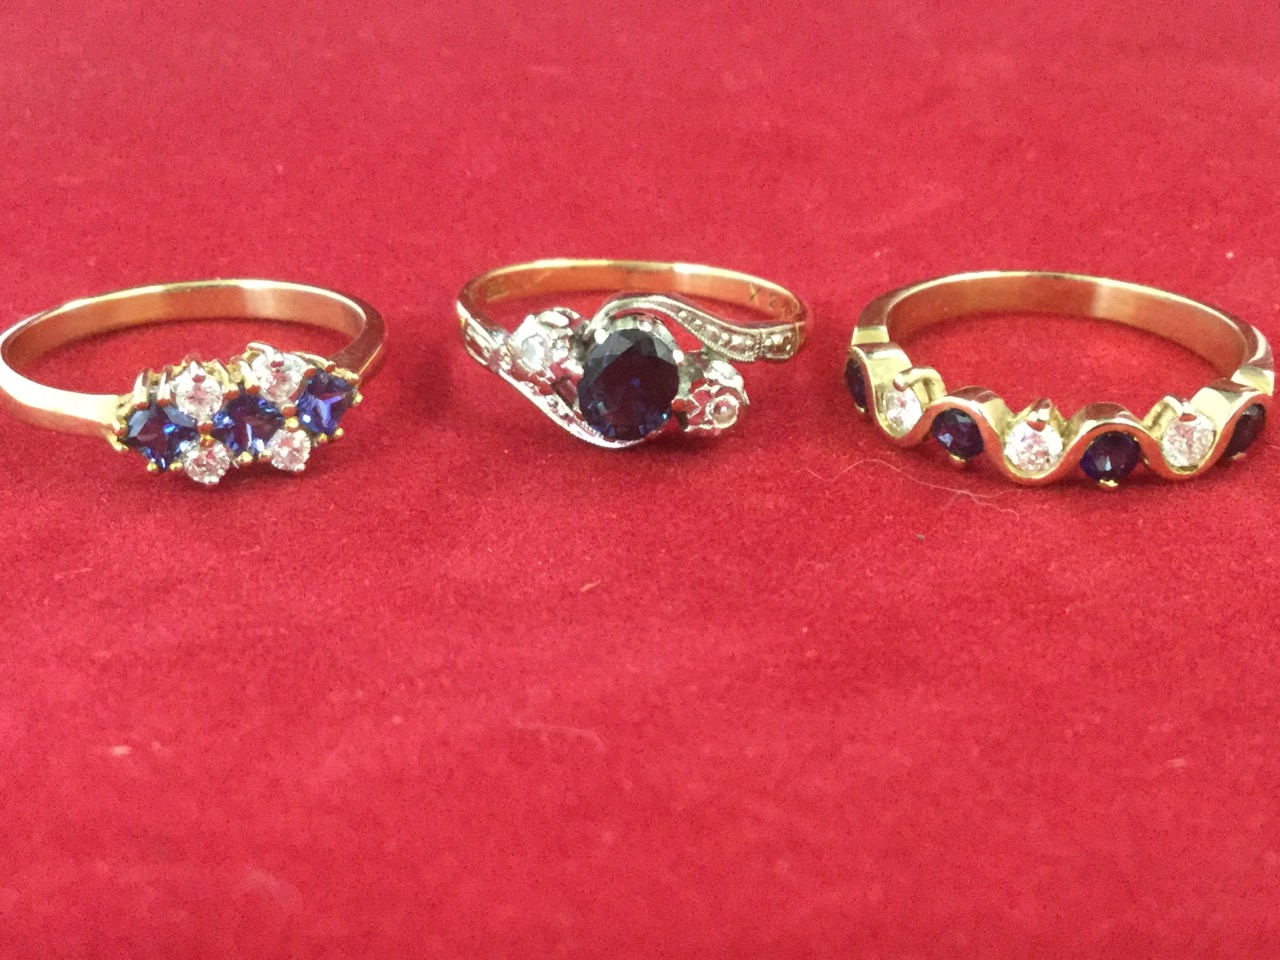 Three 18 carat gold diamond and sapphire rings, the bands claw set with contrasting stones. (3) - Image 2 of 3